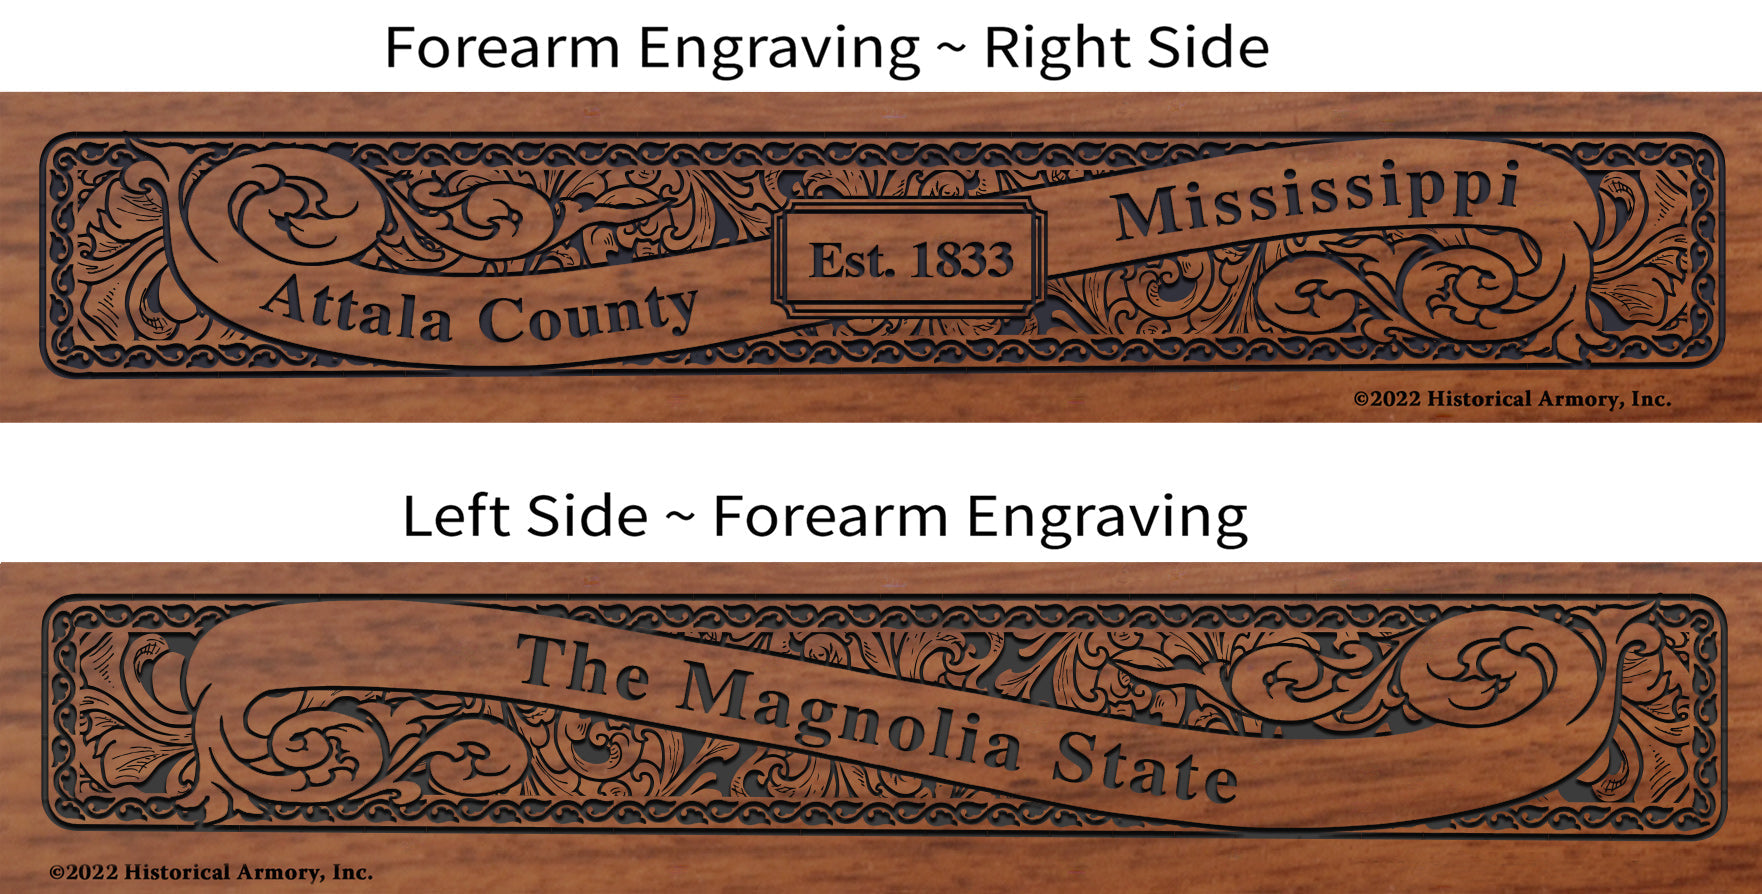 Attala County Mississippi Engraved Rifle Forearm